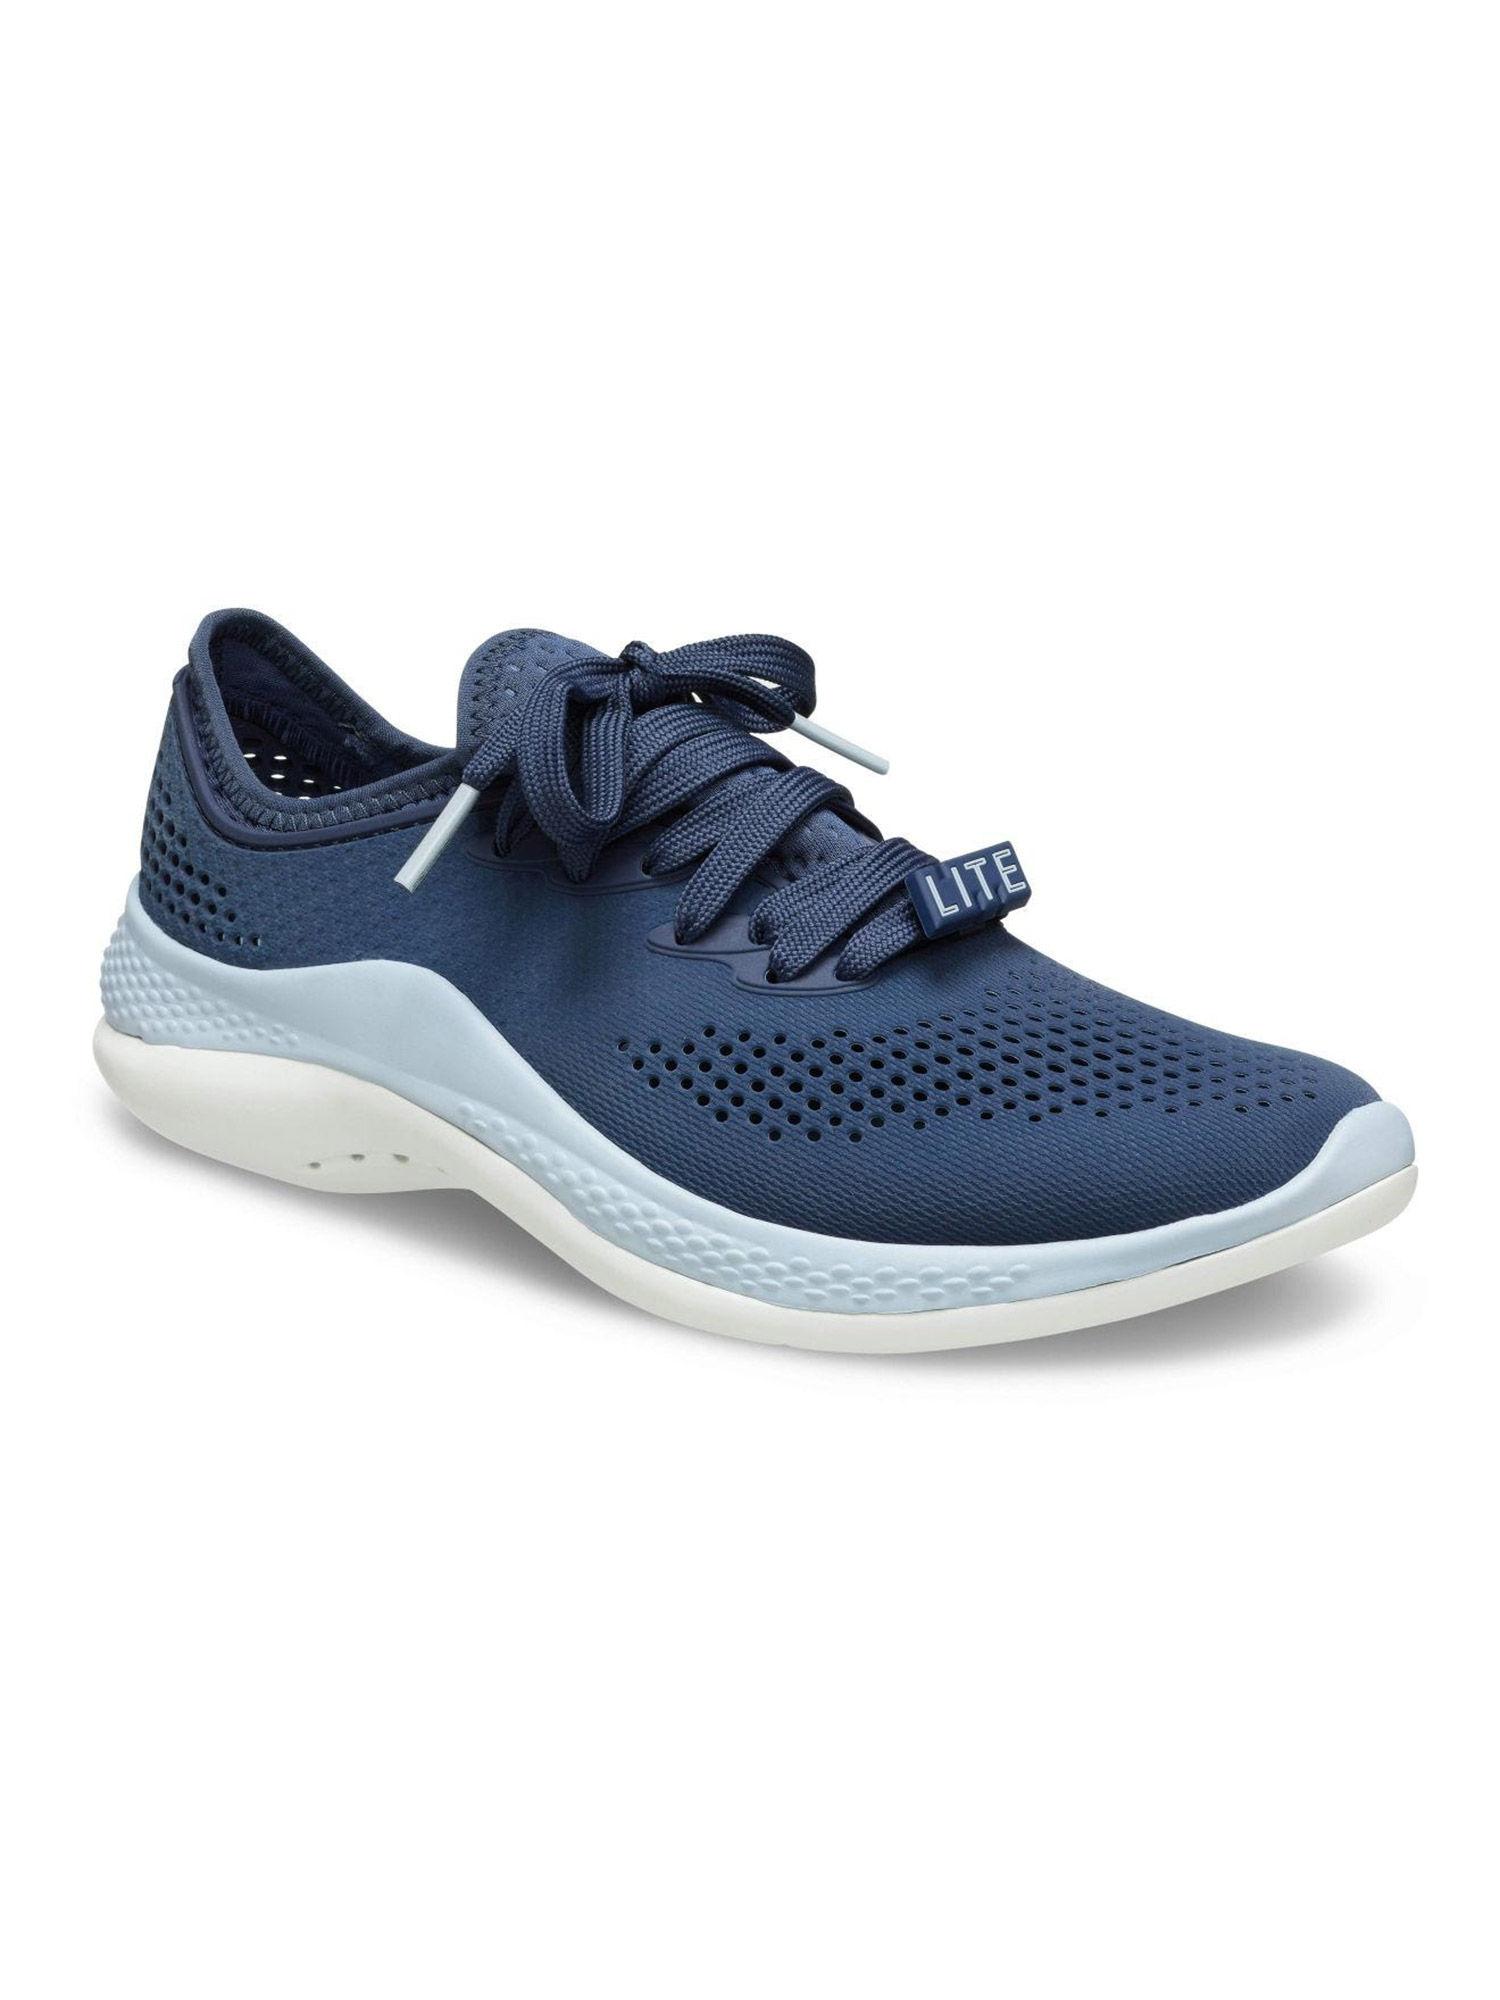 literide-navy-blue-casual-shoes